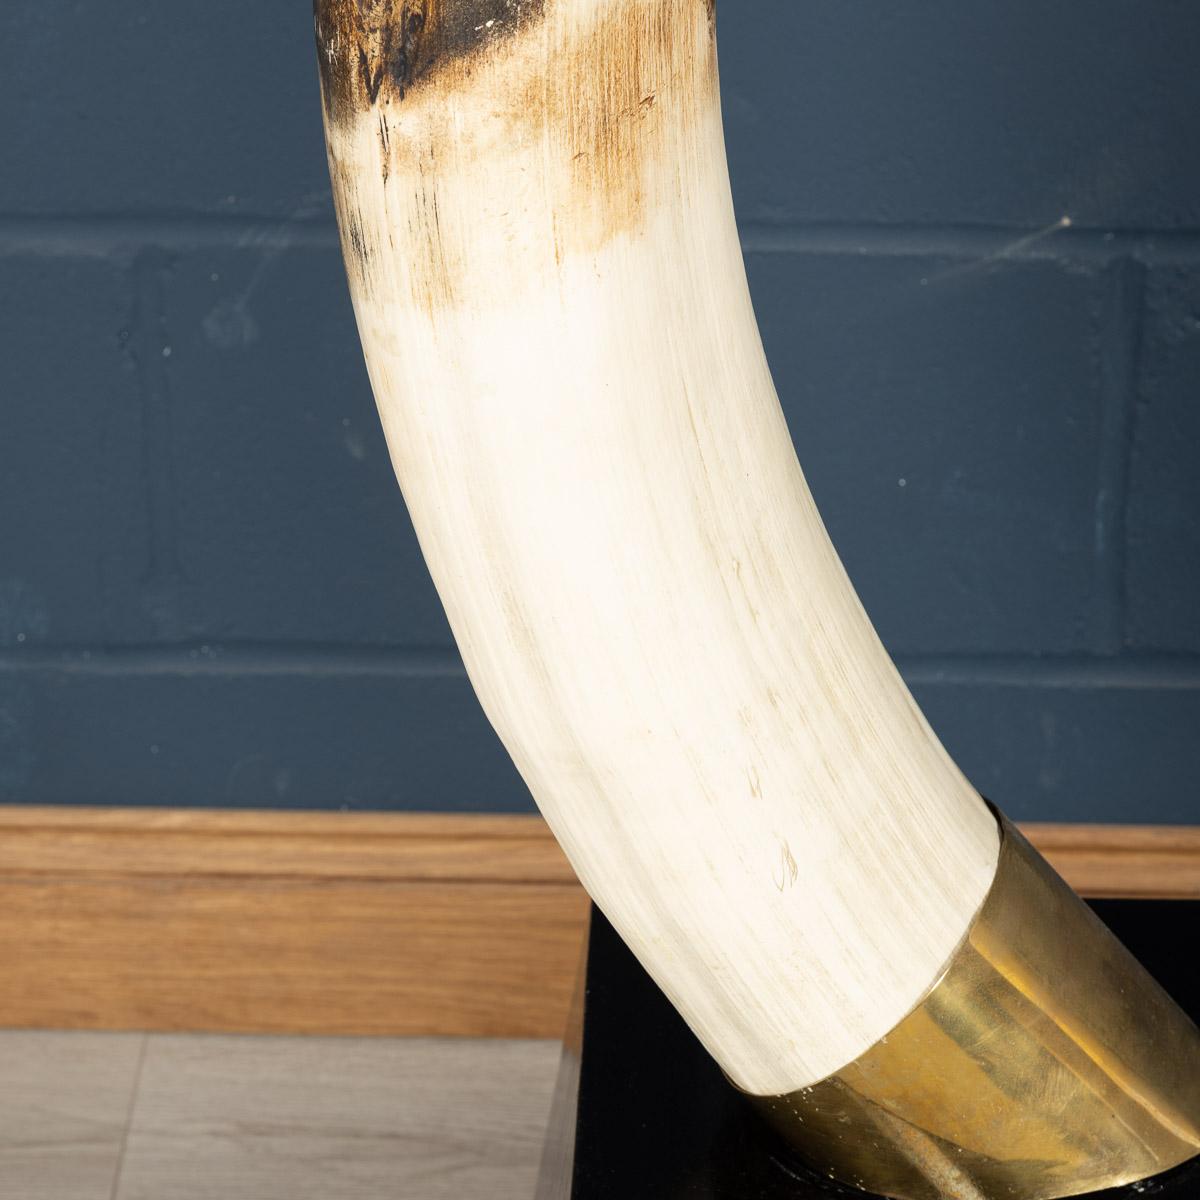 Pair of Massive 21st Century Resin Tusks by Anthony Redmile London 2